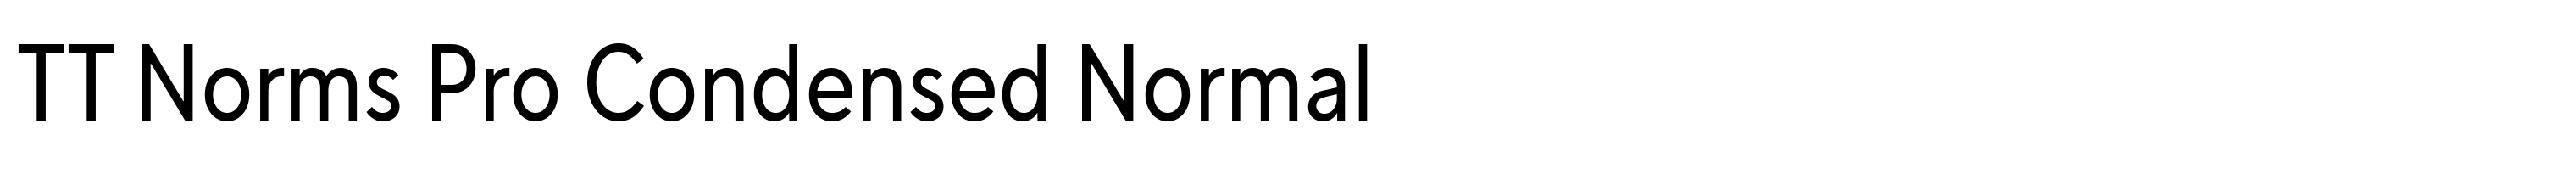 TT Norms Pro Condensed Normal